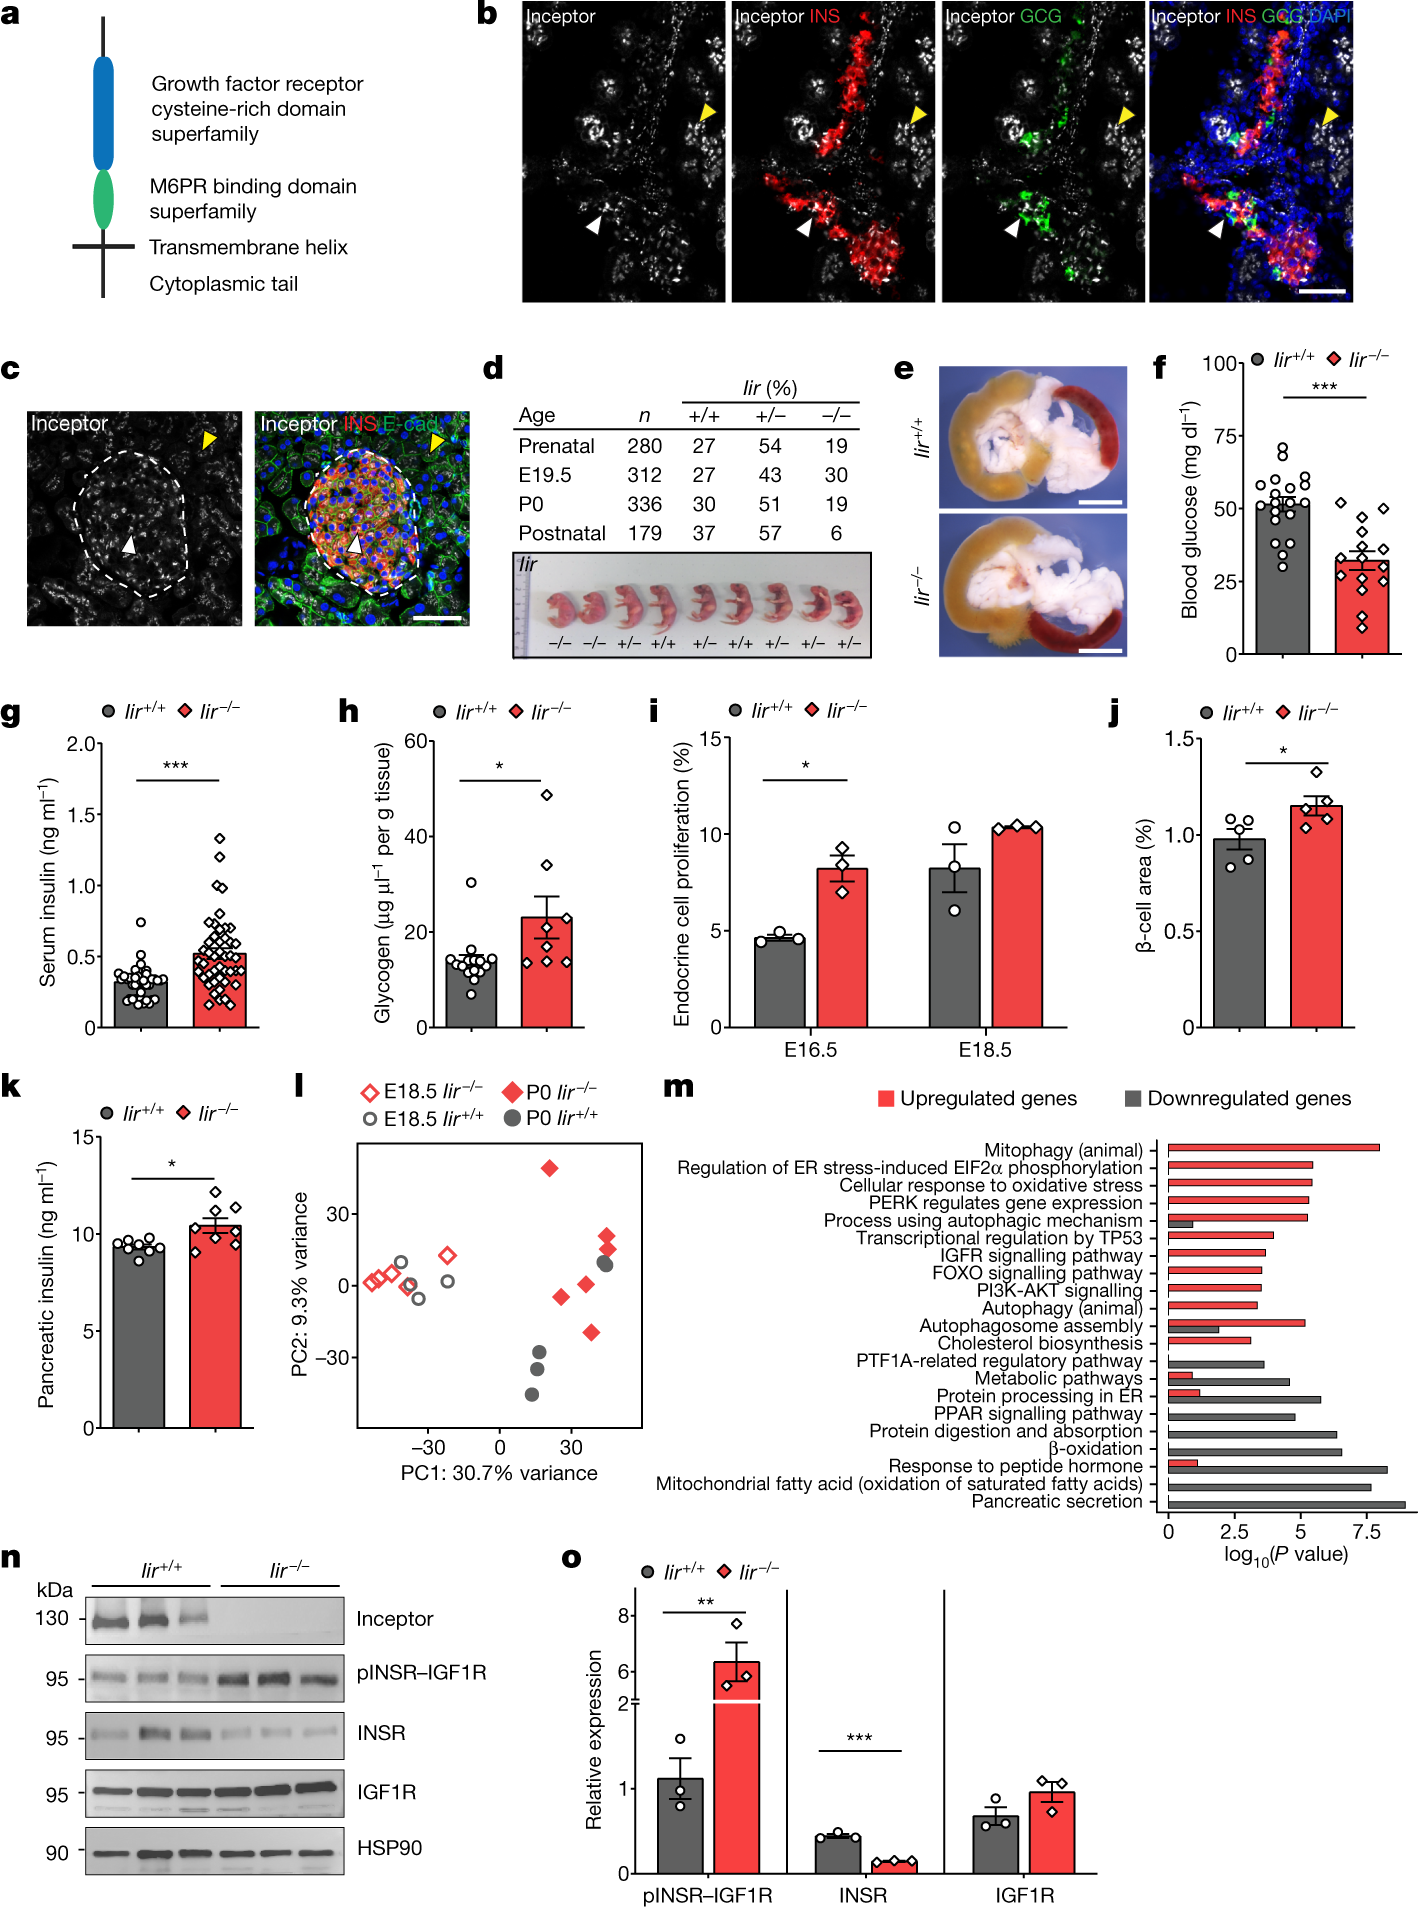 Inceptor counteracts insulin signalling in β-cells to control glycaemia |  Nature